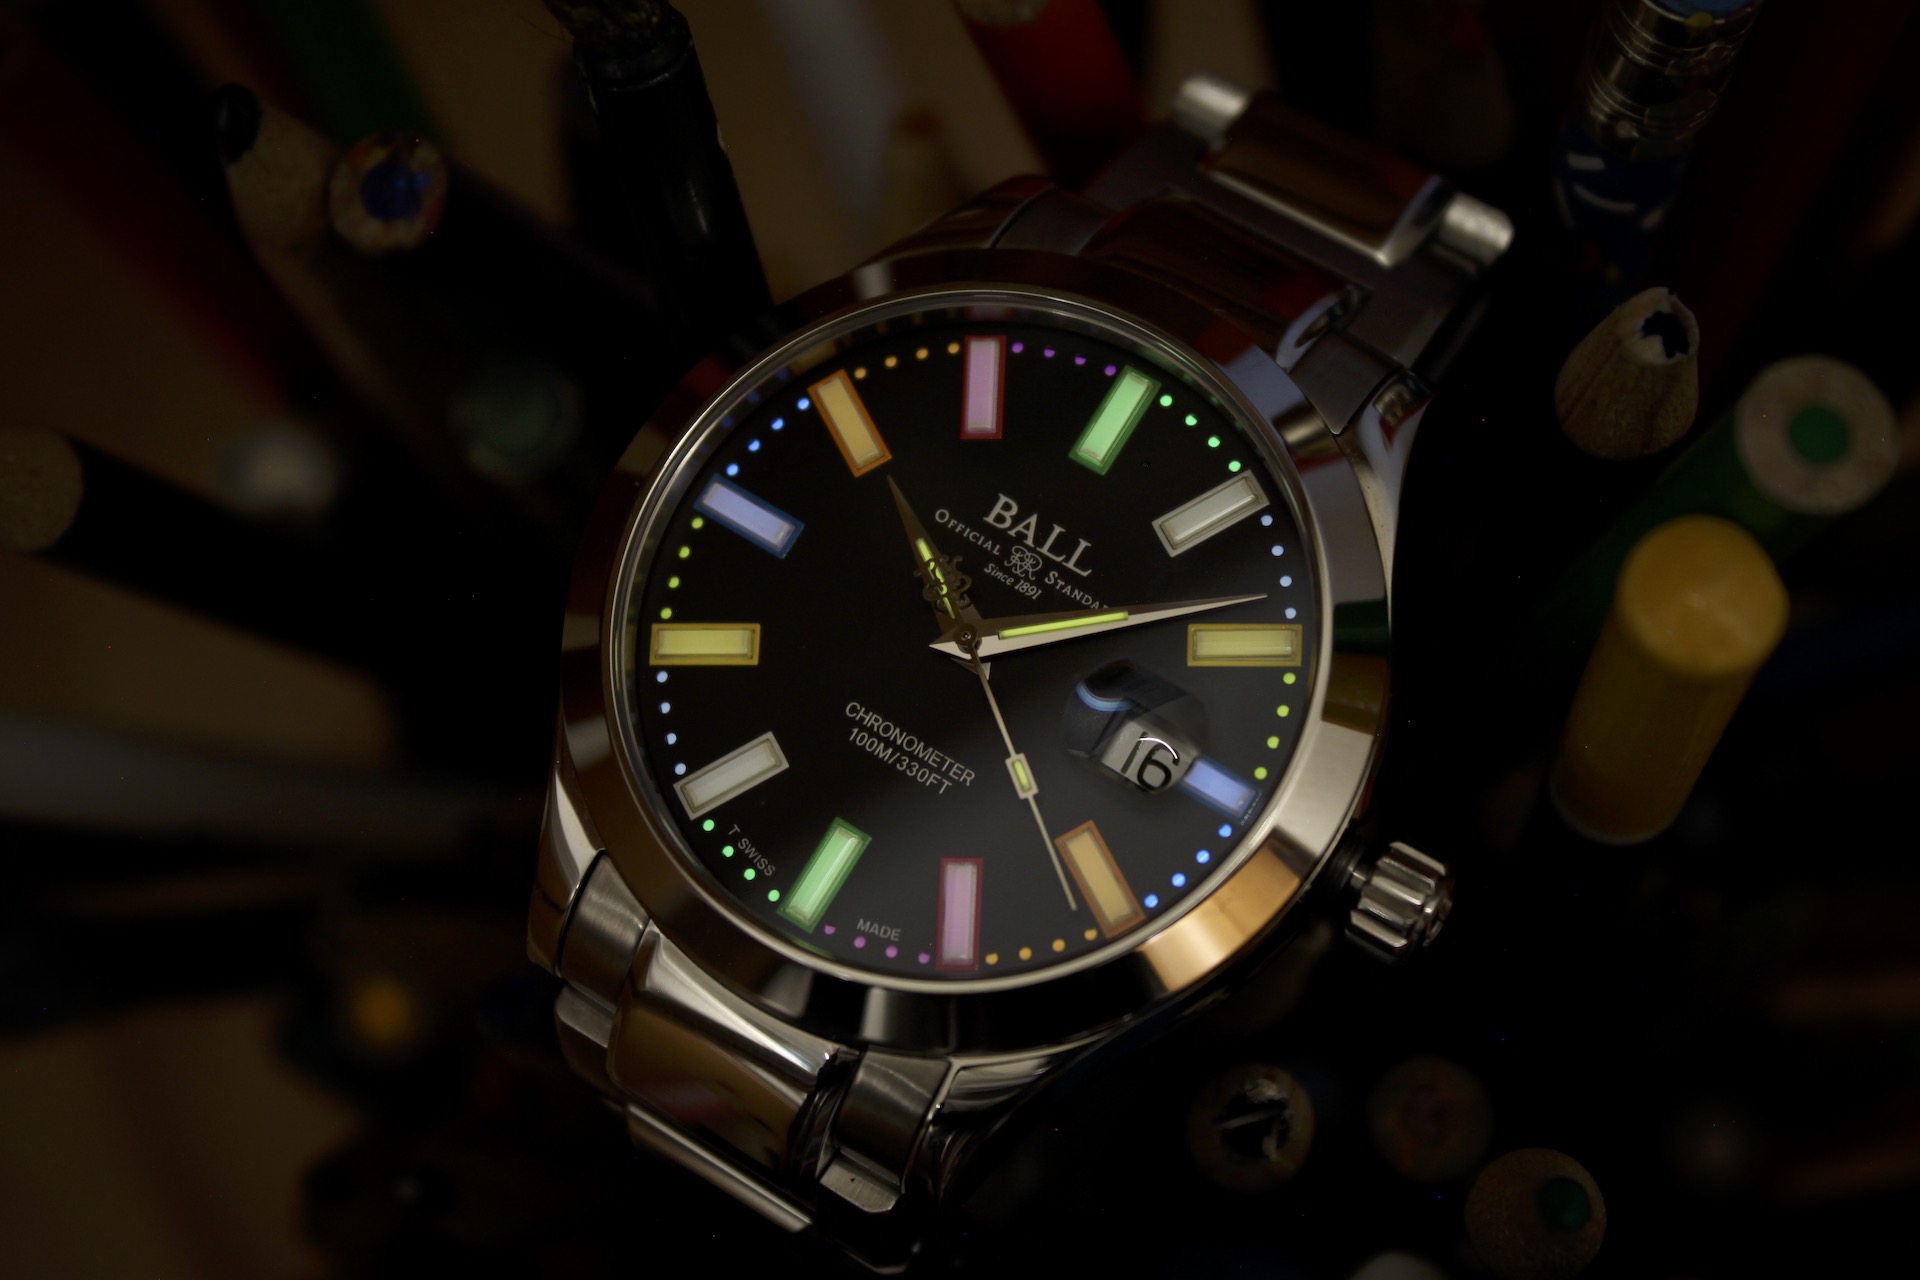 Watch Review: BALL Watch Engineer III Marvelight Caring Edition